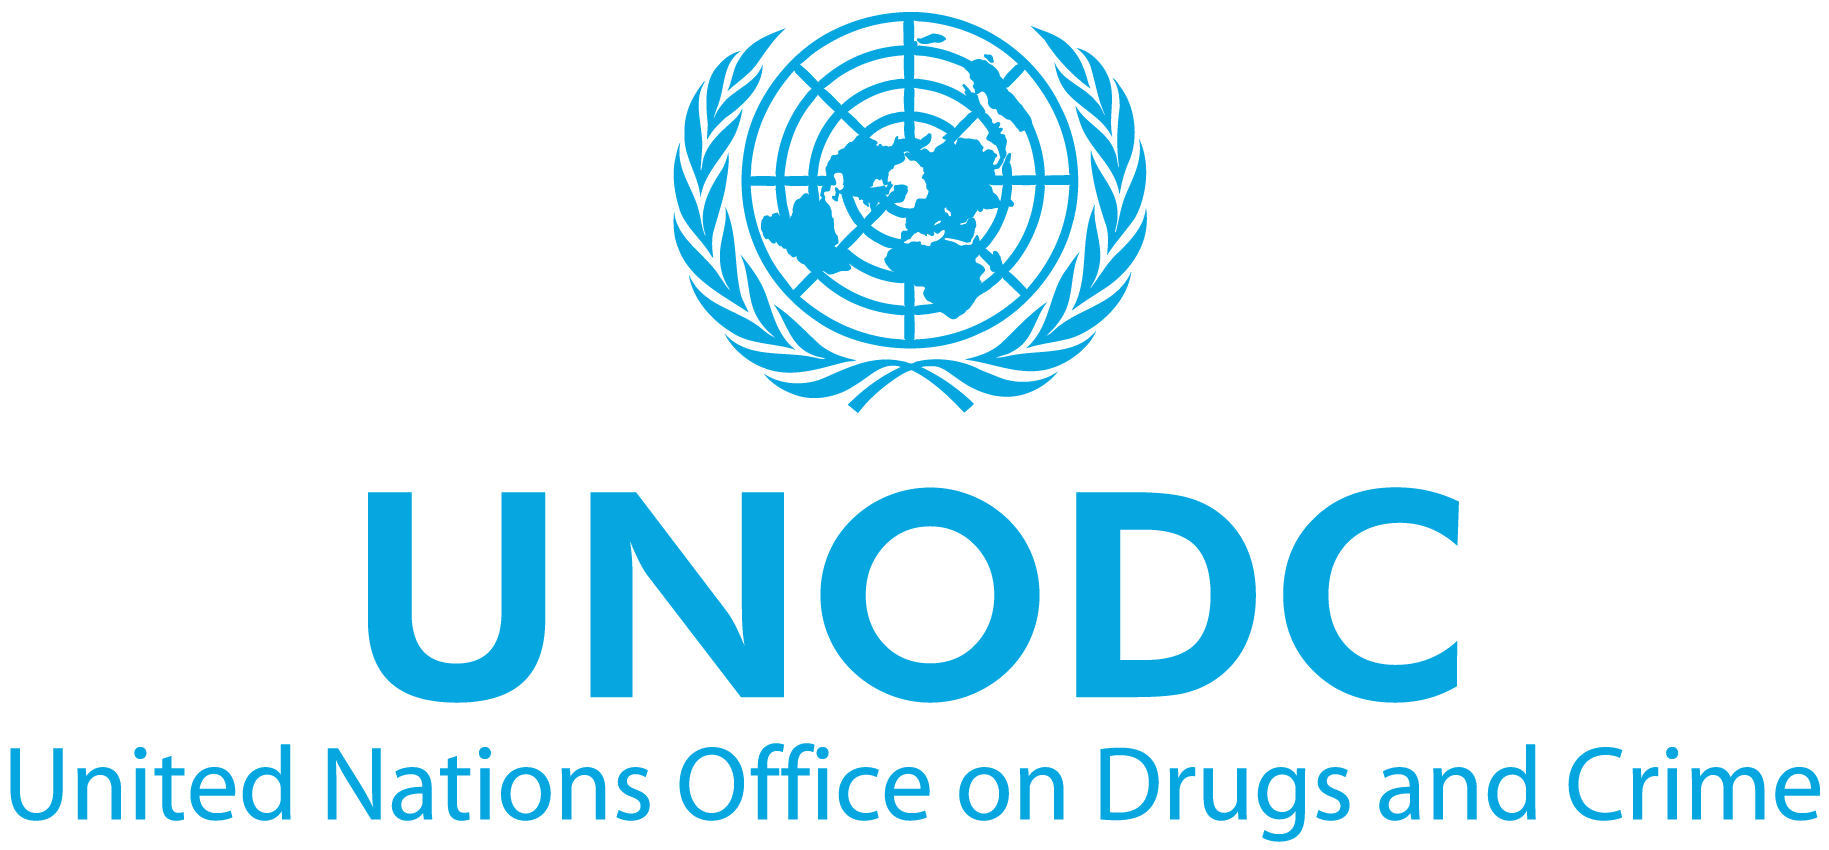 UNODC Logo - Wildlife crime assessed globally for the first time in new UNODC ...